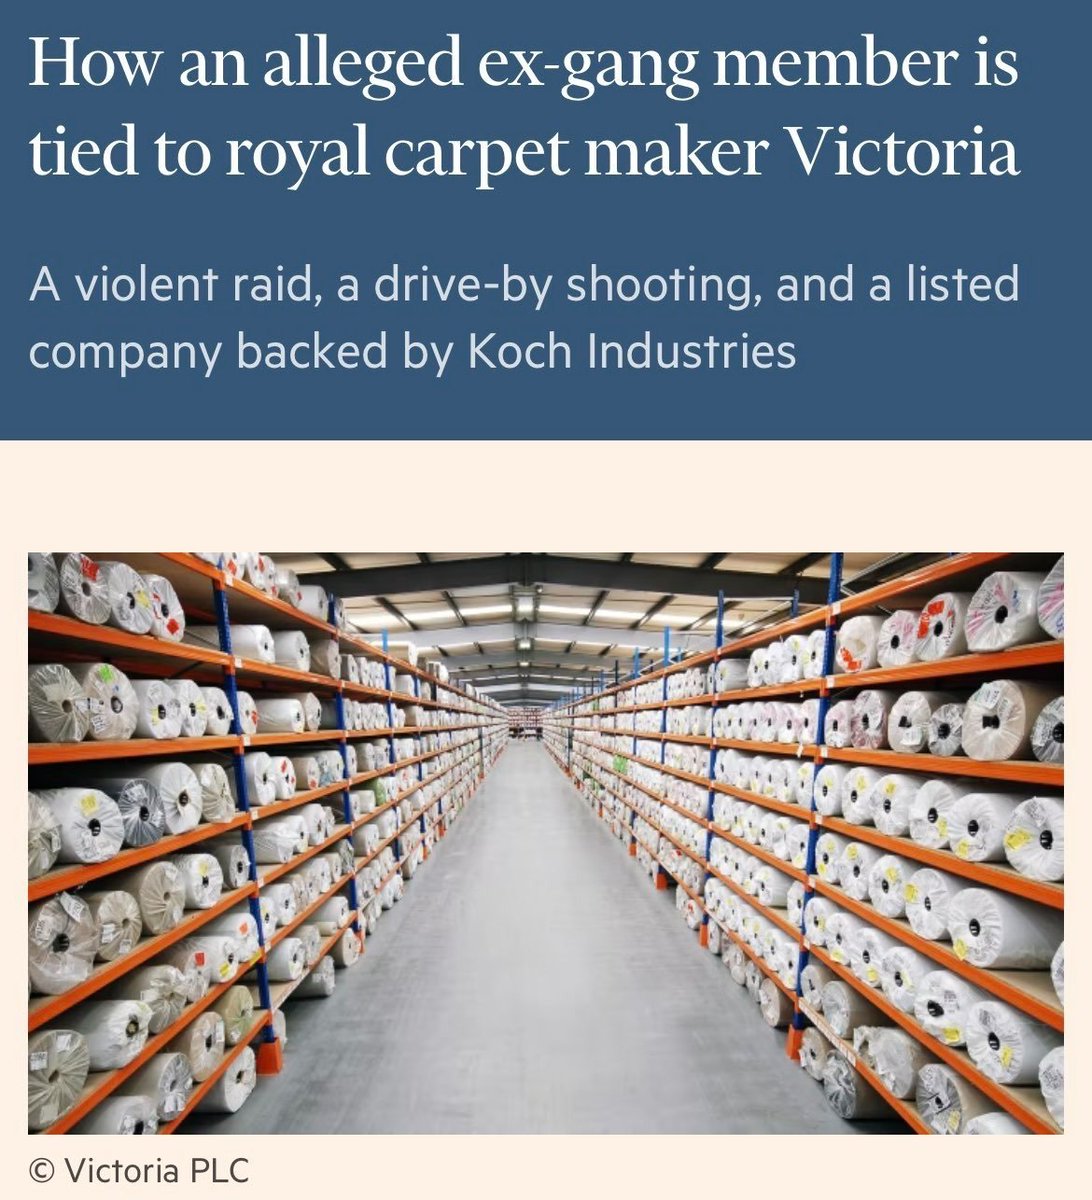 When you follow the money, you don’t where it’s going to take you. Pulling on a thread at a Victoria plc, a royal carpet maker backed by the Kochs, led me to an alleged ex-gang member who survived a drive-by shooting. Read the full yarn here 👇🏻 ft.com/content/49b2d1…